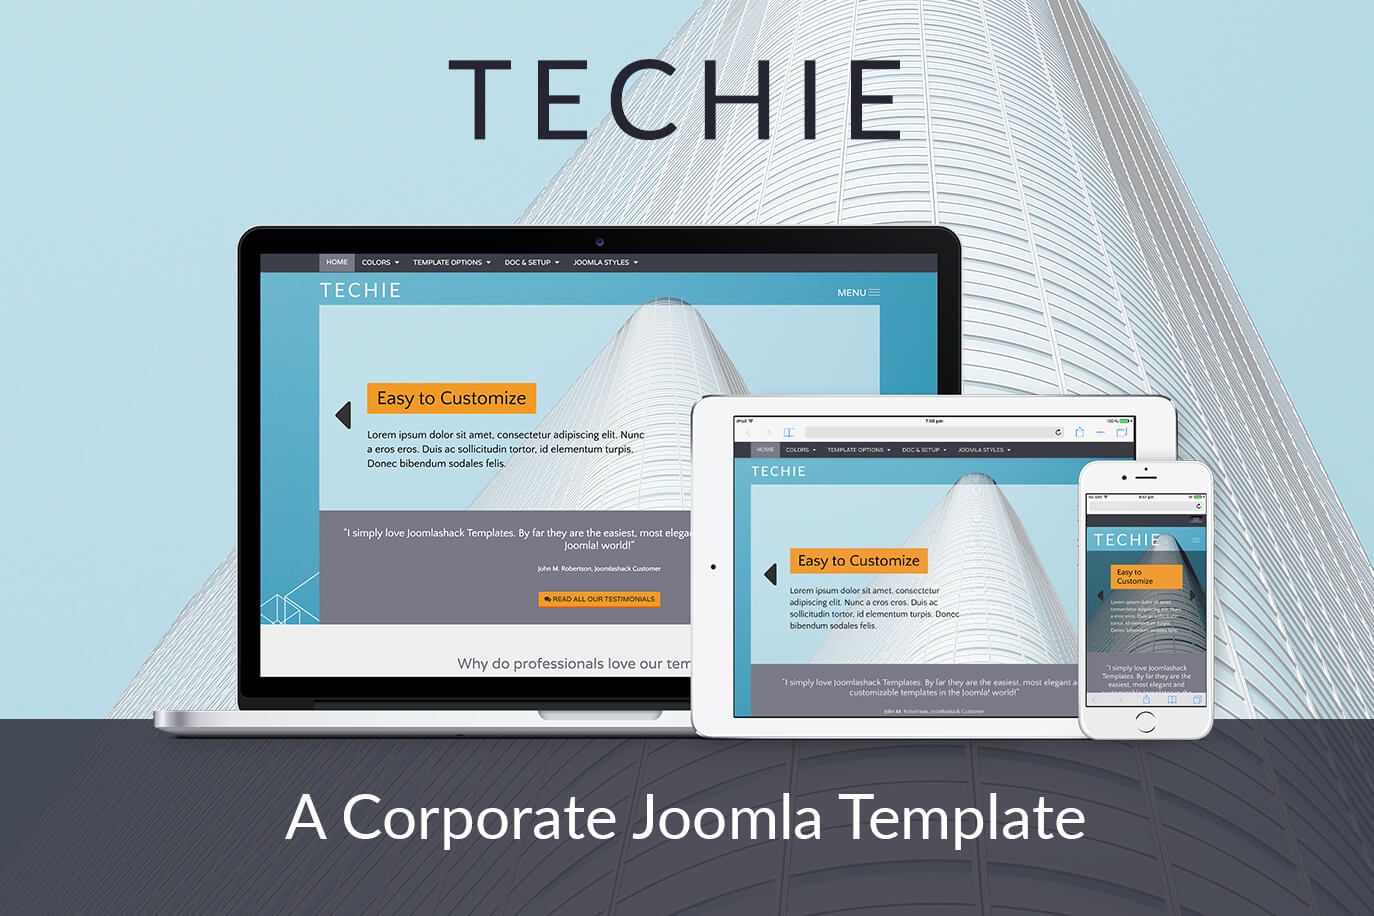 Techie is a fresh, corporate Joomla template